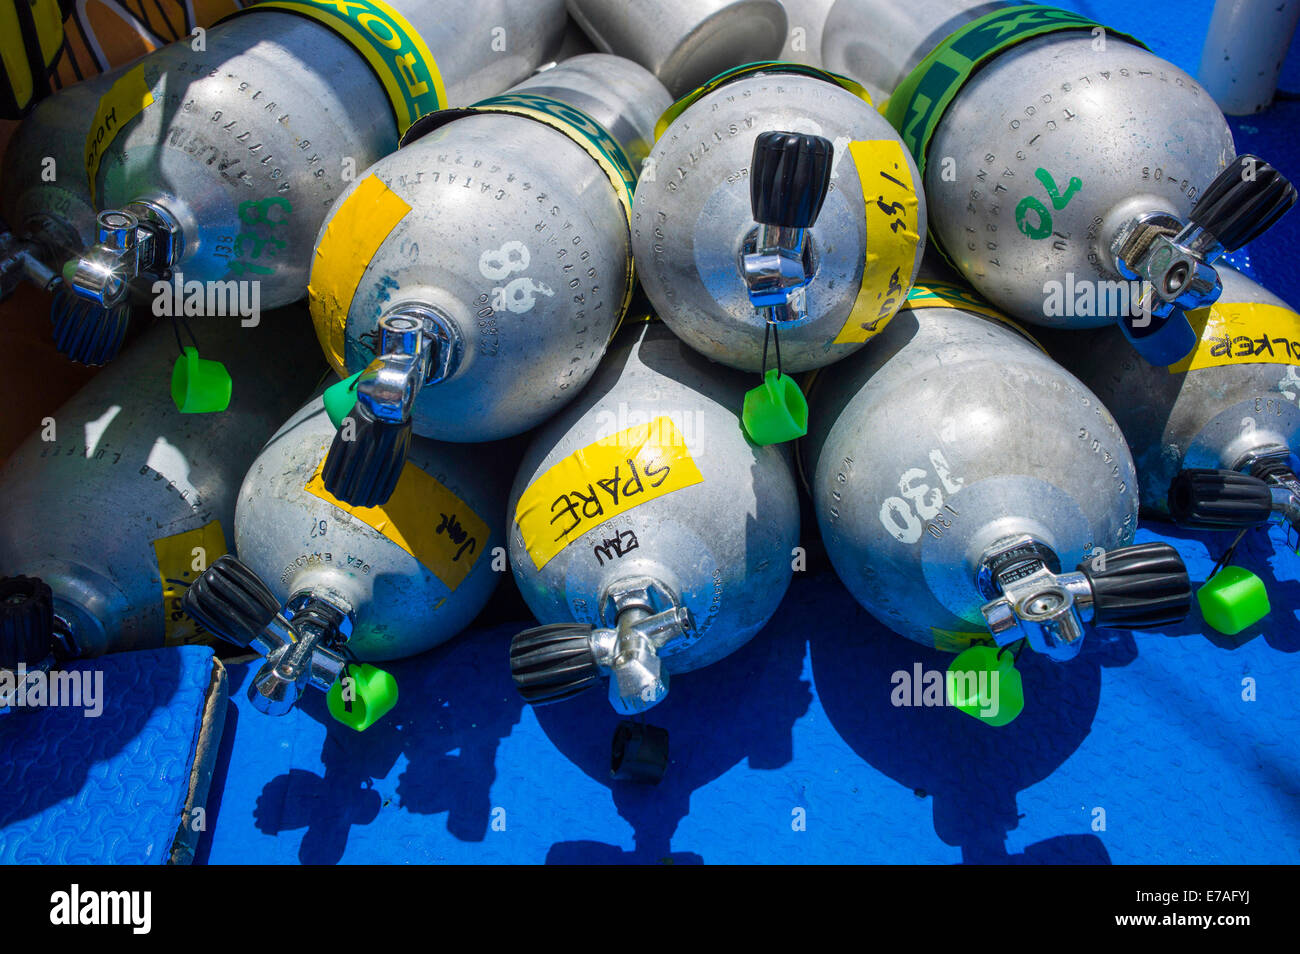 Compressed air cylinders or scuba tanks lying in a diving boat, Philippines Stock Photo